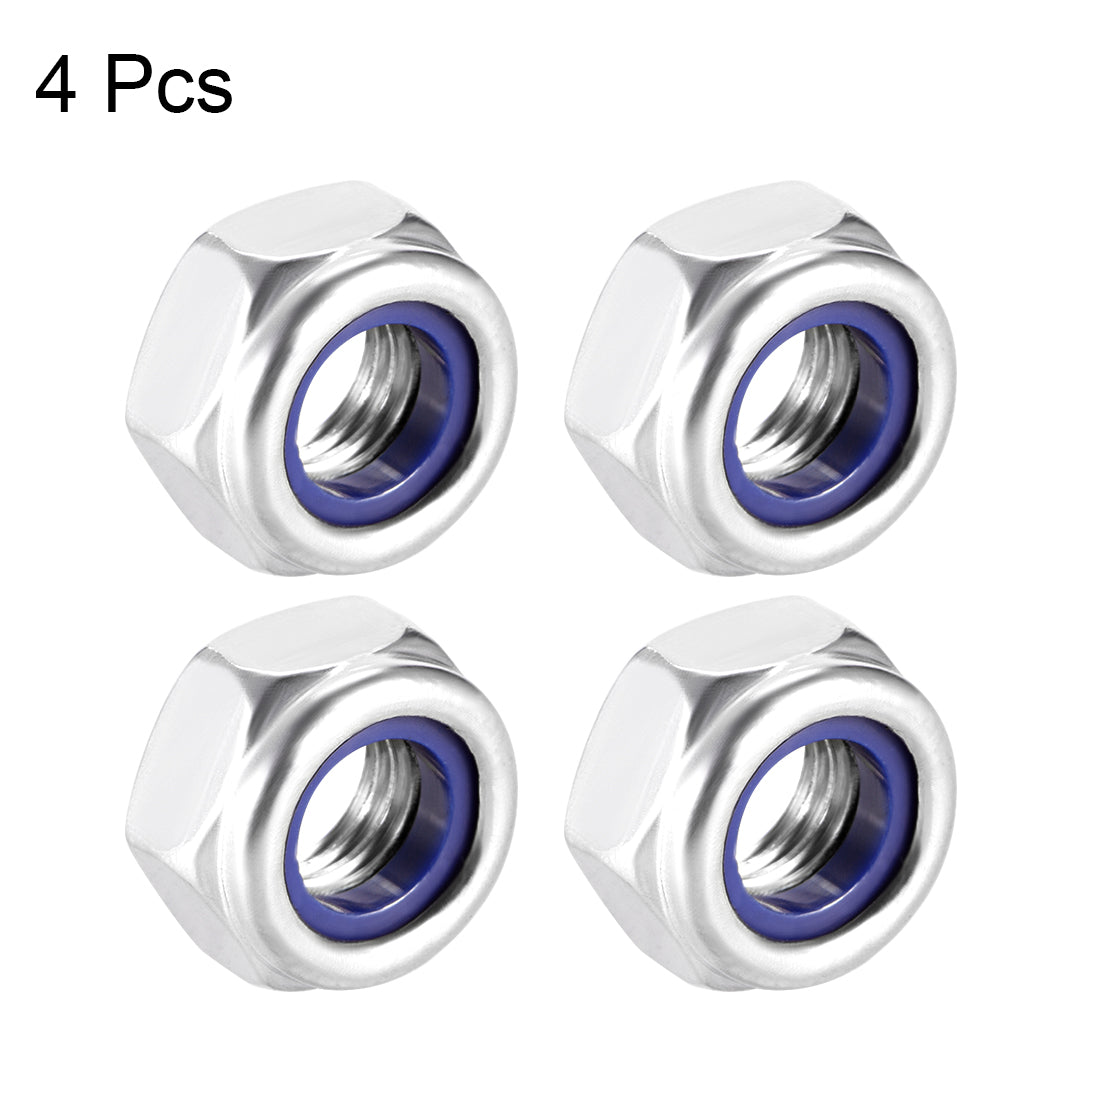 uxcell Uxcell M10x1.5mm Hex Lock Nuts Stainless Steel Nylon Insert Self-Lock Nuts, 4Pcs Silver